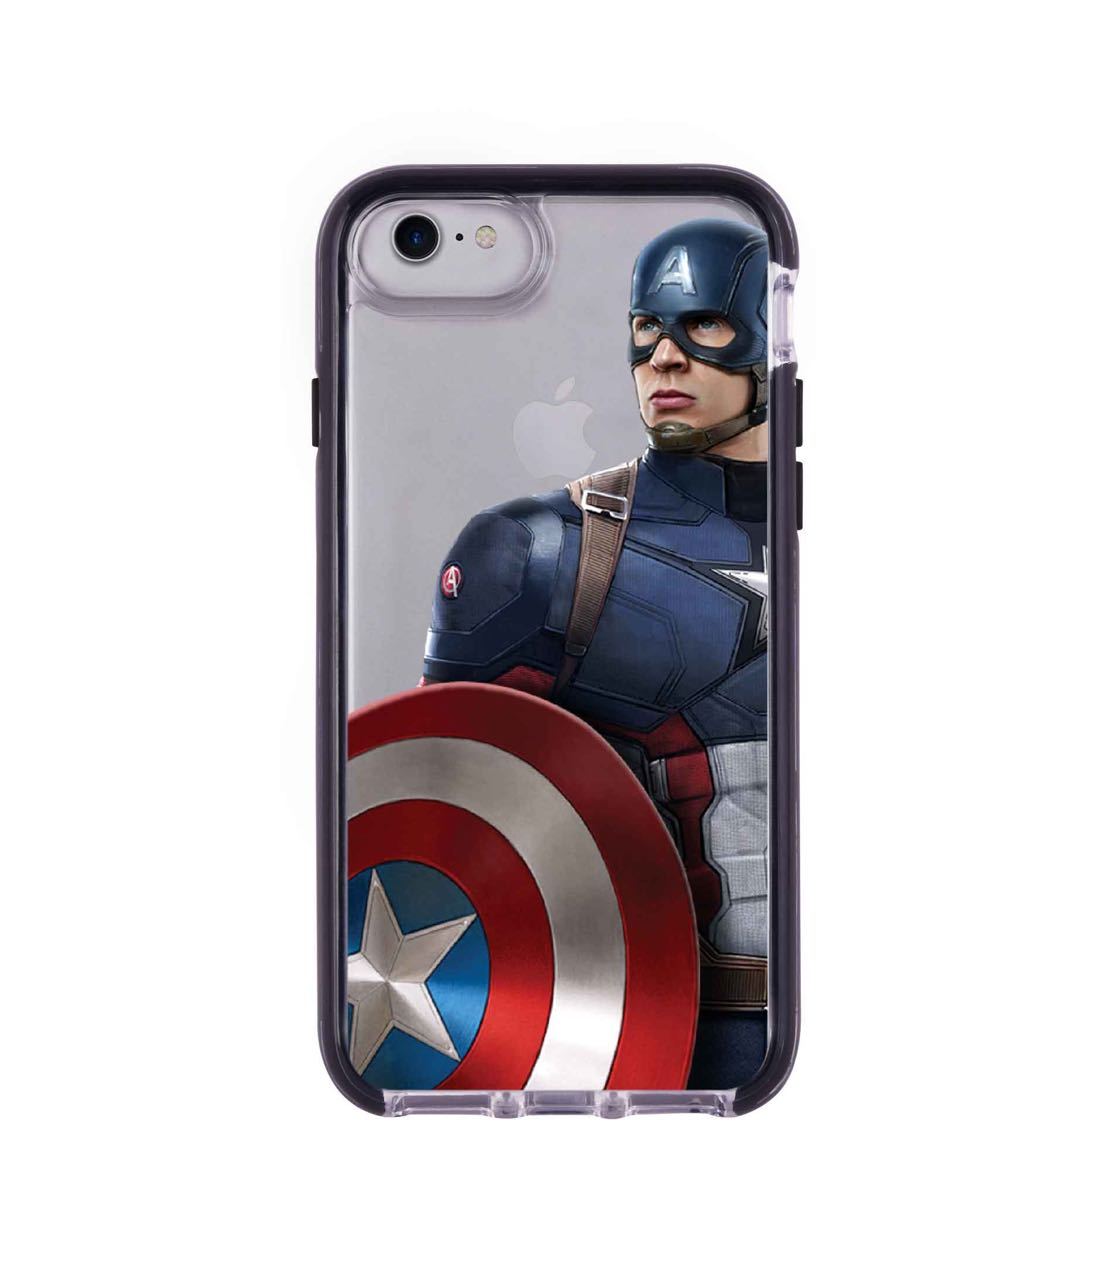 Team Blue Captain - Extreme Phone Case for iPhone 7